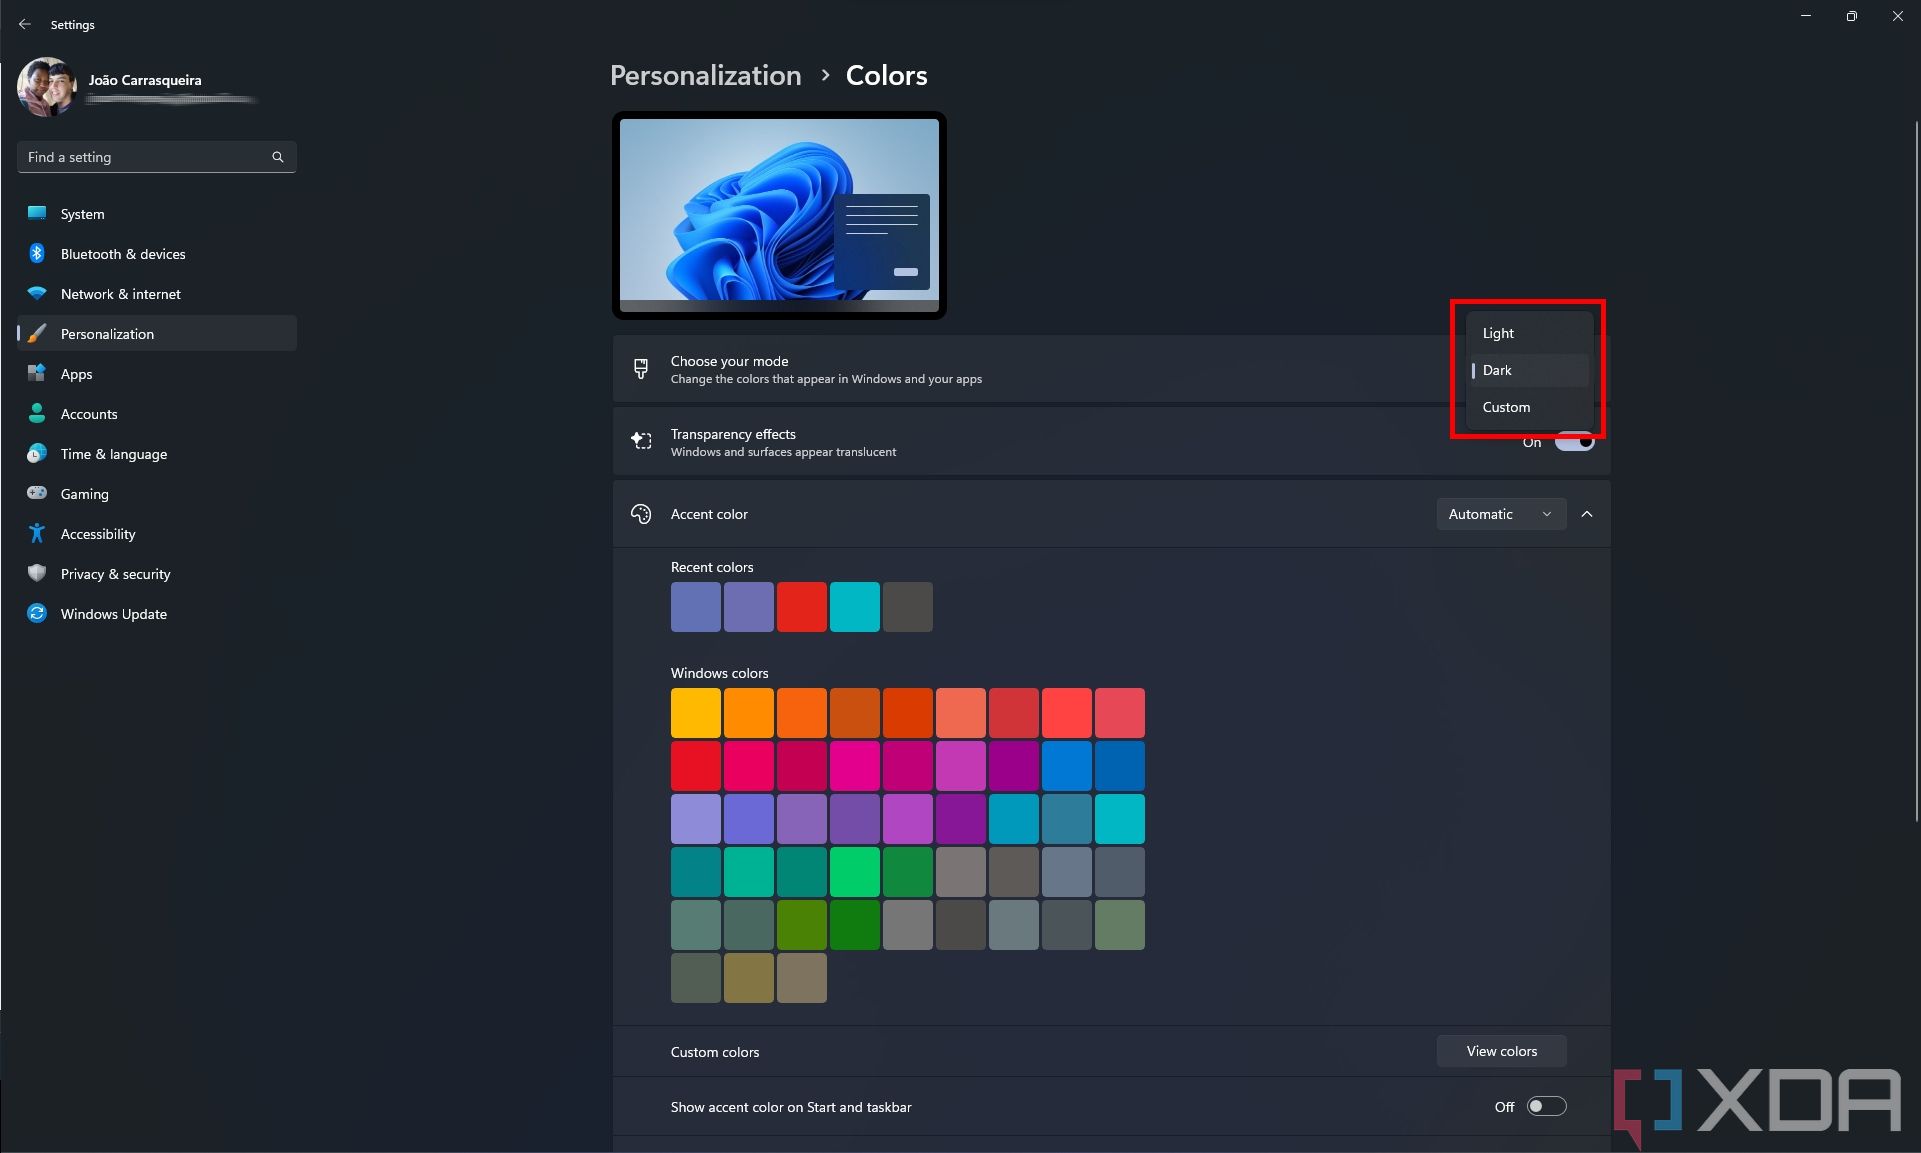 Screenshot of the Colors page in the Windows 11 Settings page, with the option to choose a light or dark mode highlighted.